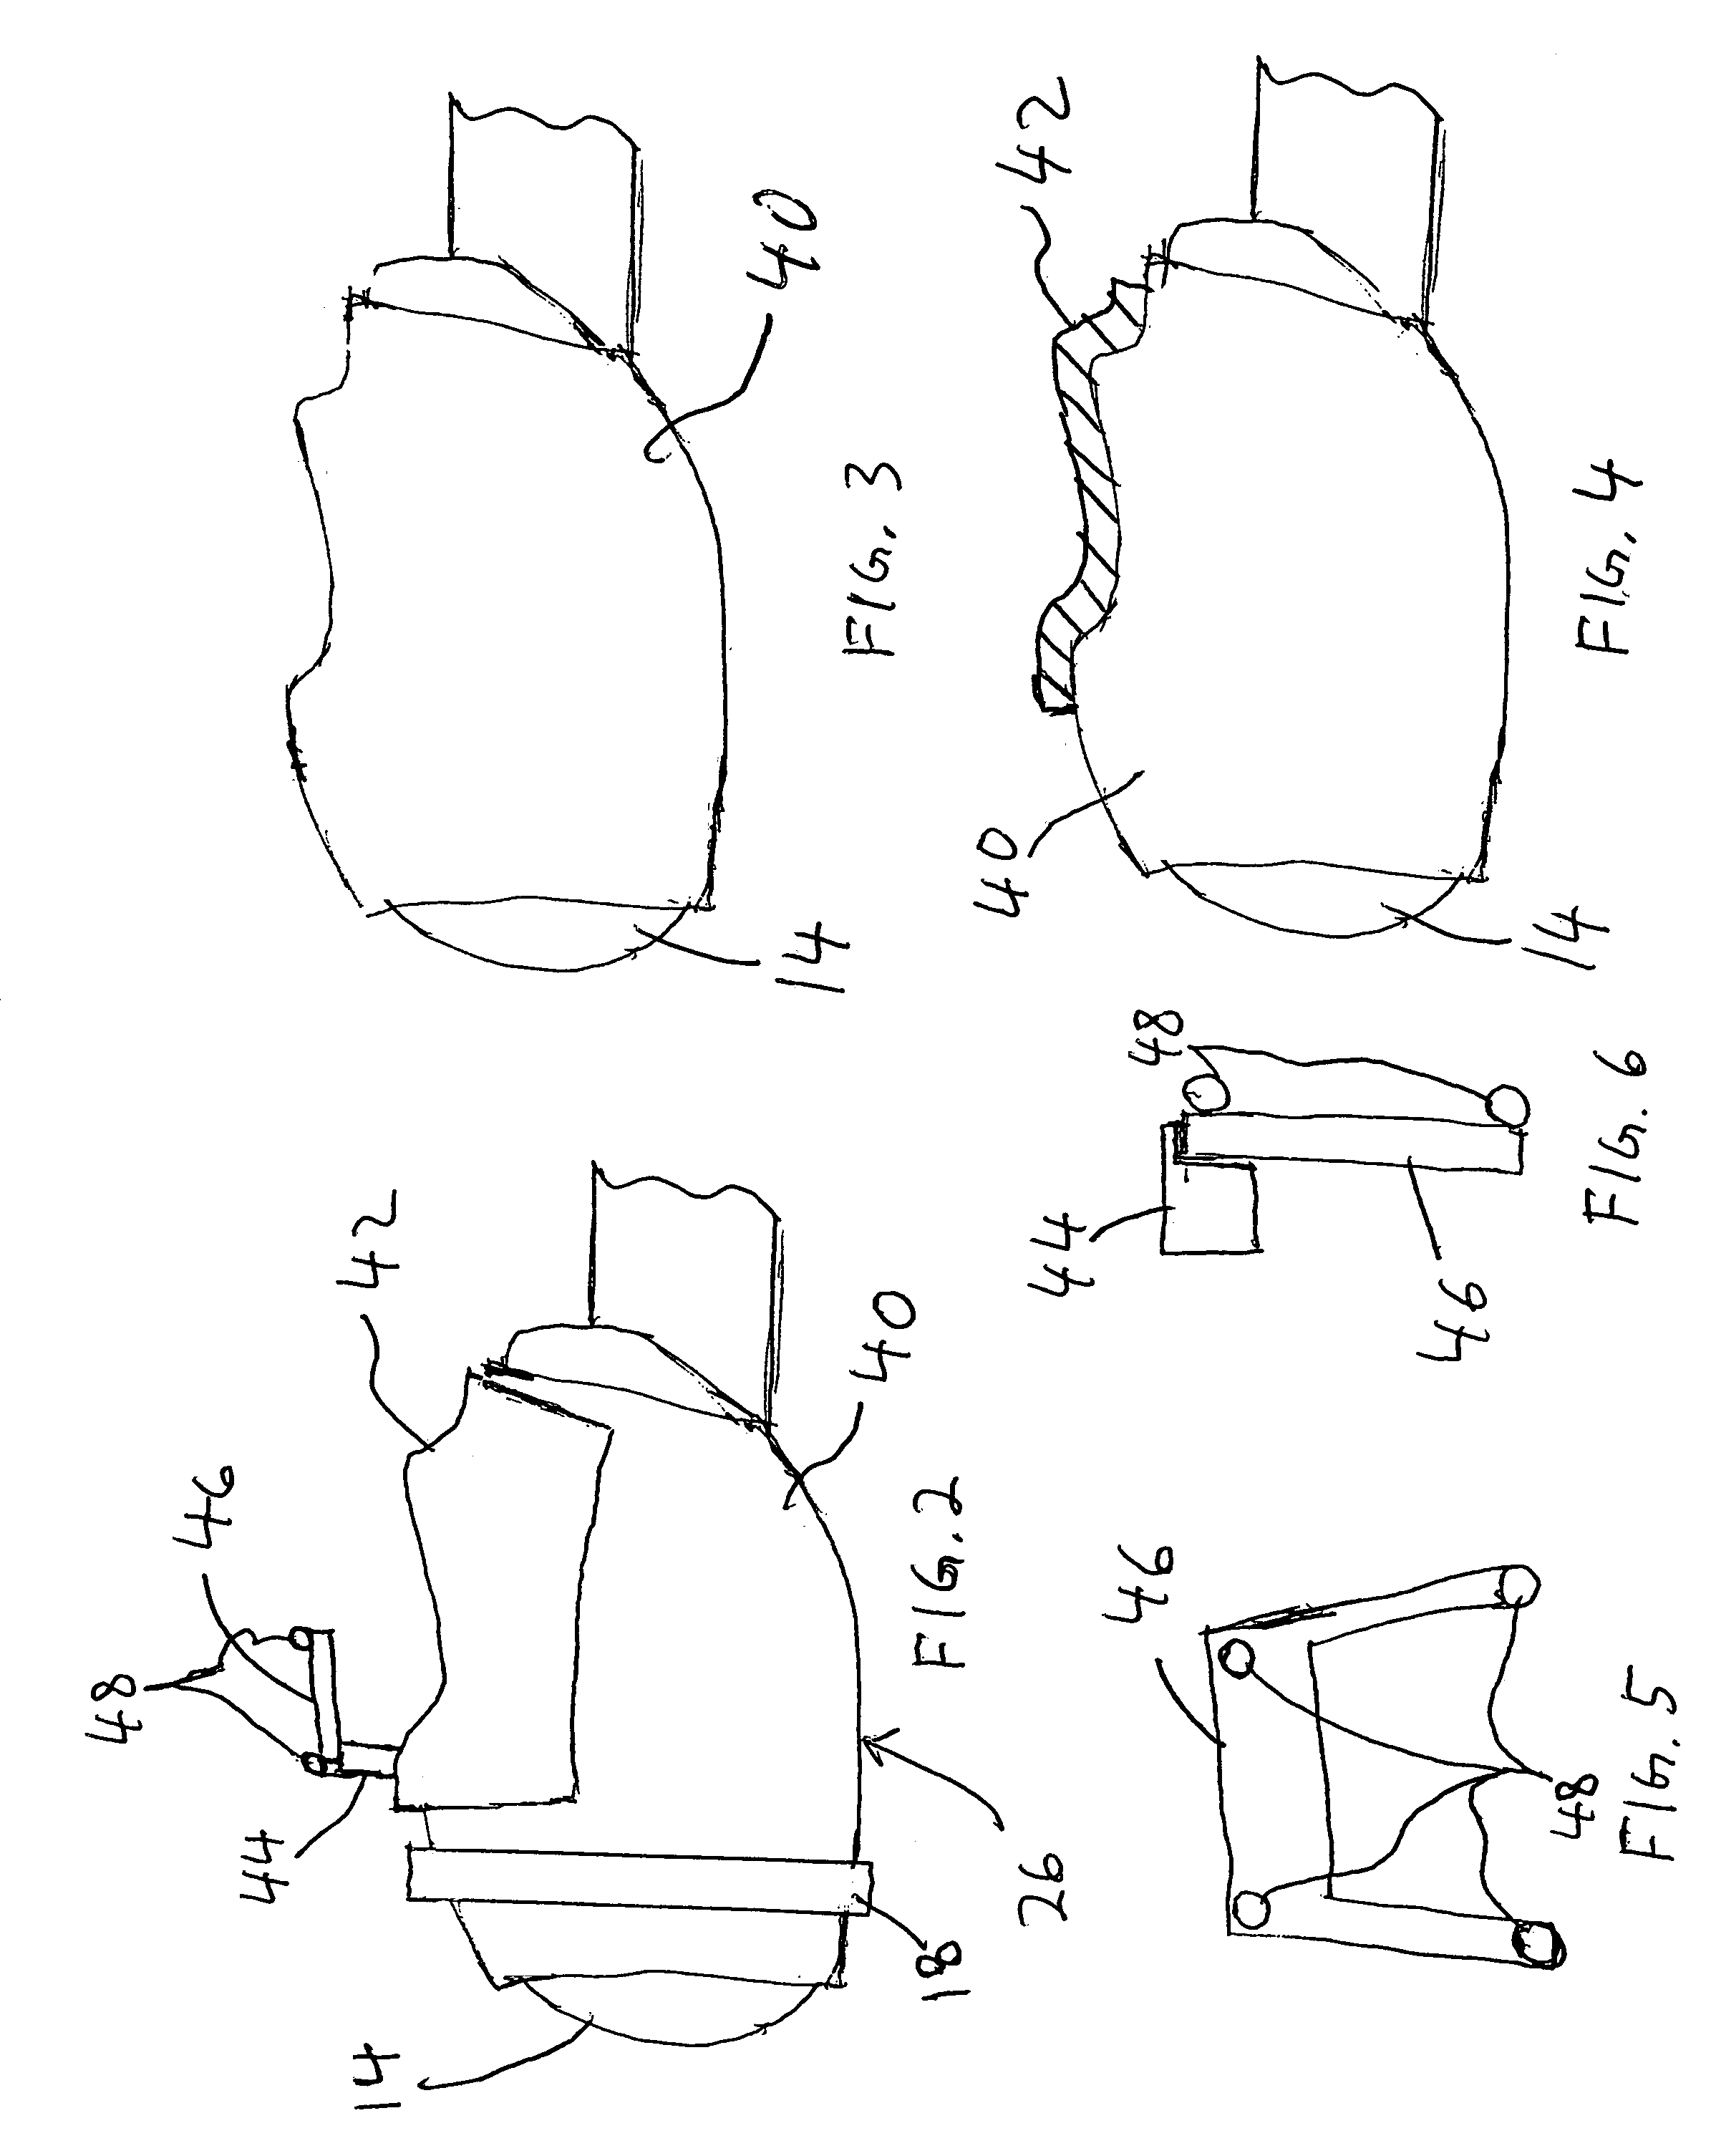 Mask system and method for stereotactic radiotherapy and image guided procedures